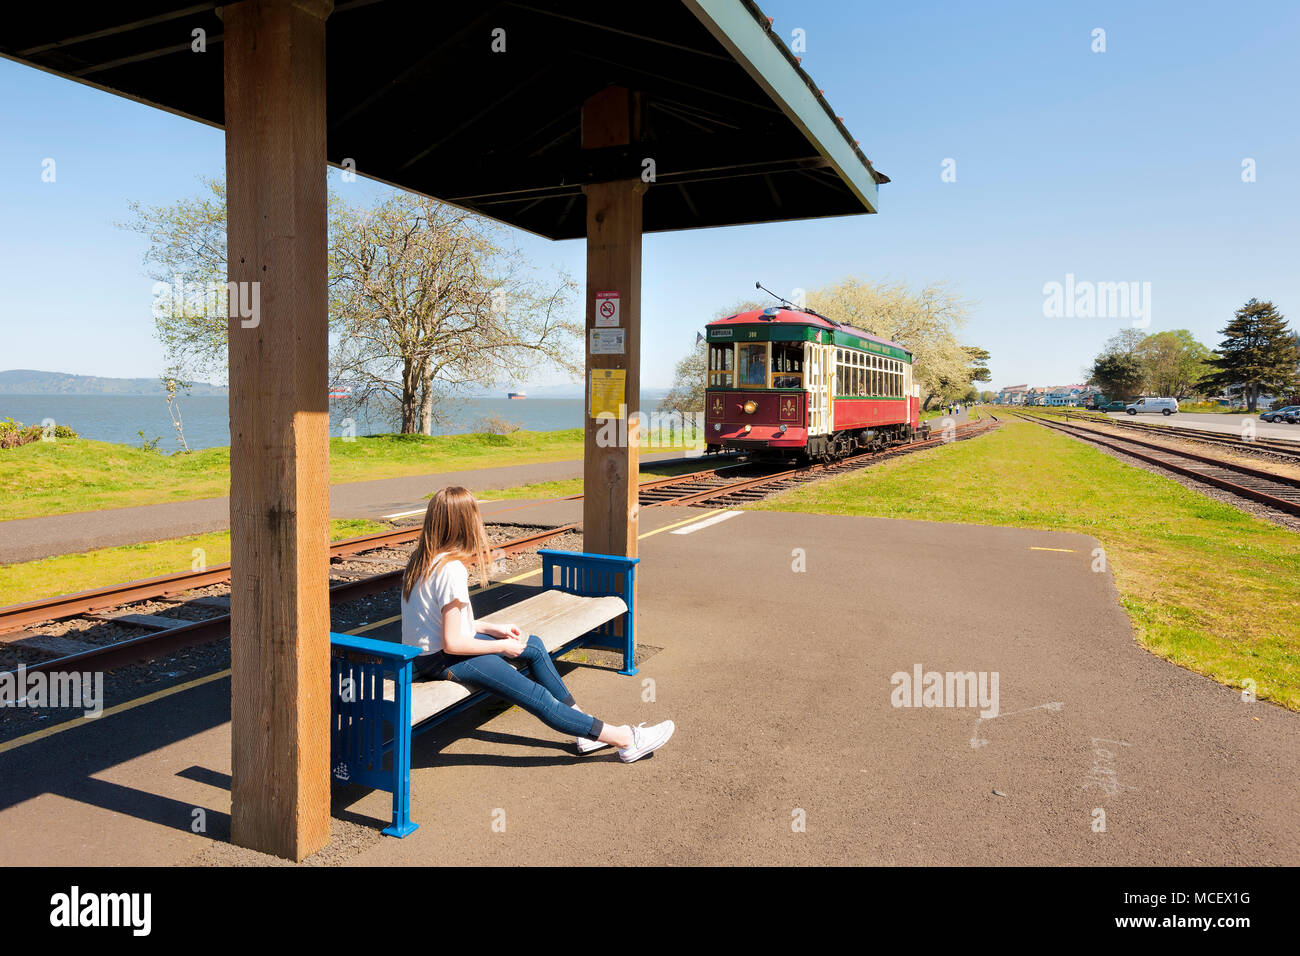 Astoria, Oregon, USA - April 7, 2016: A young girl waits at a stop to ride the trolley along the Columbia River on Astoria, Oregon's waterfront, Stock Photo